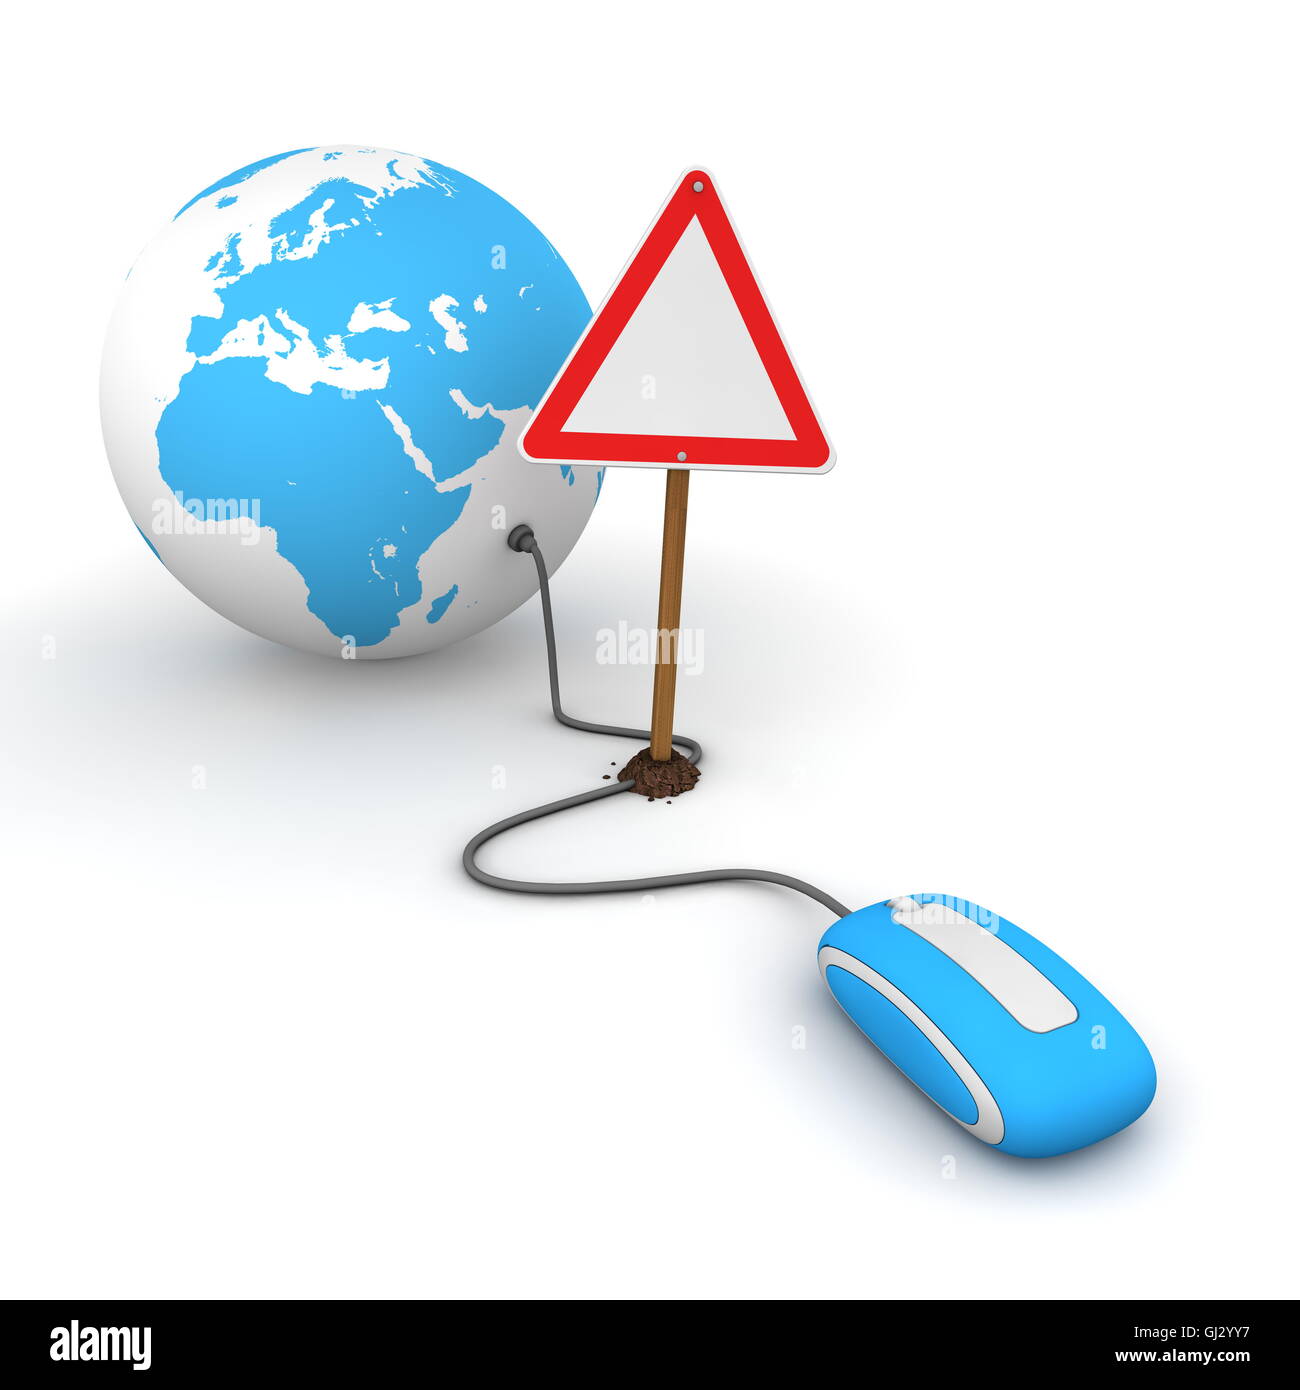 Surfing the Web in Blue - Blocked by a Triangular Warning Sign Stock Photo